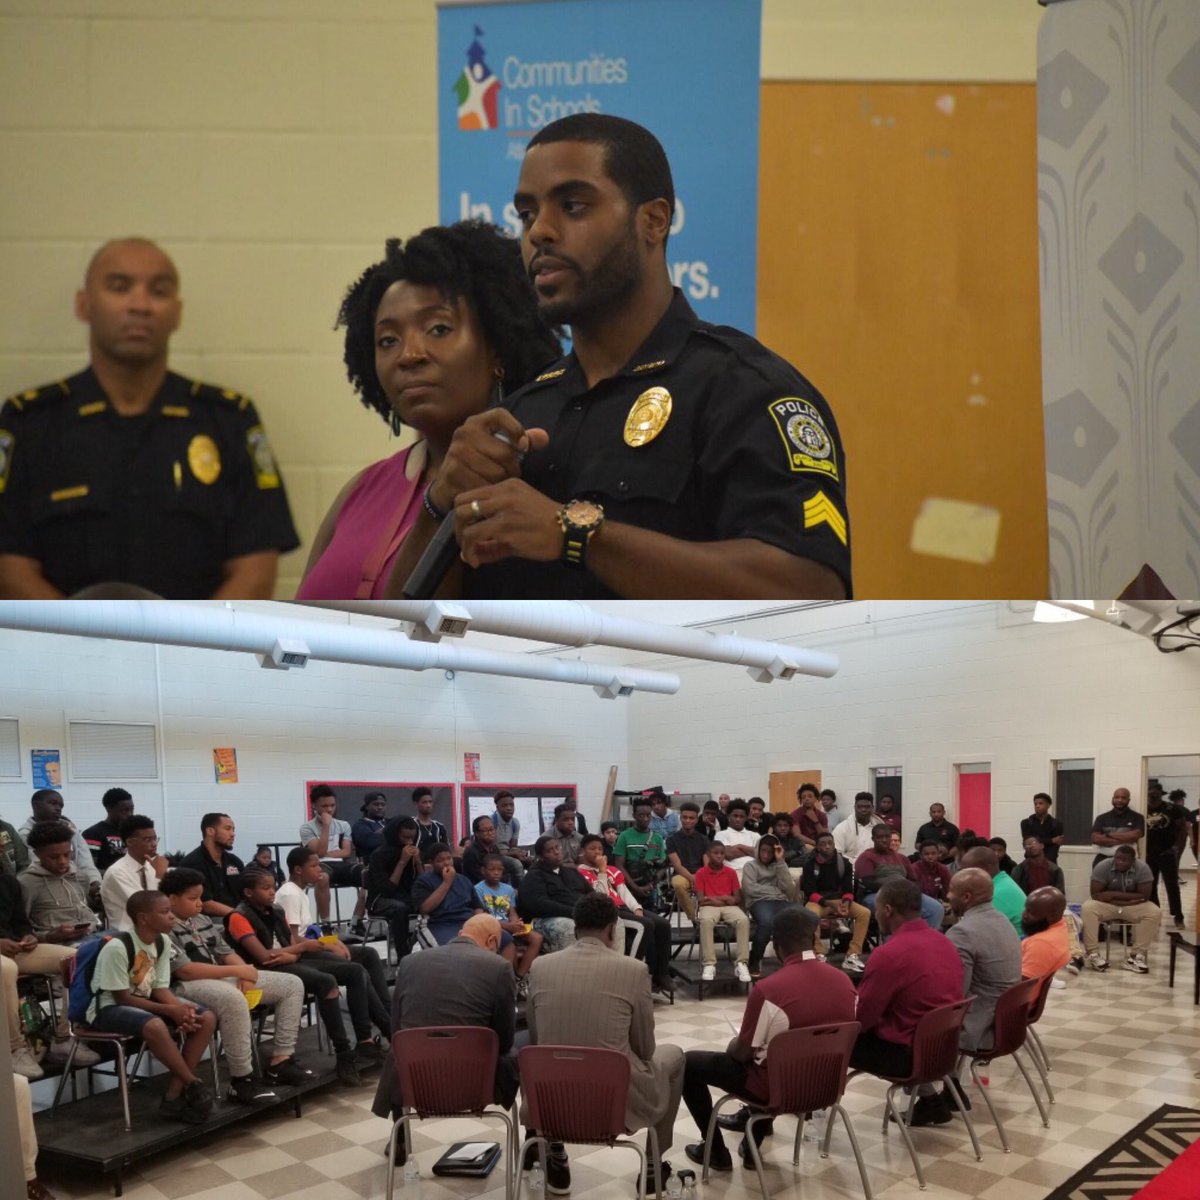 @APSPolice Sgt. Quarless Duncan leading a panel discussion on Brotherhood & Solidarity with his mentee group, Young Men of Carver Leadership Academy. @APSCarver @apsupdate @PBS_Atlanta @CarstarphenMJ